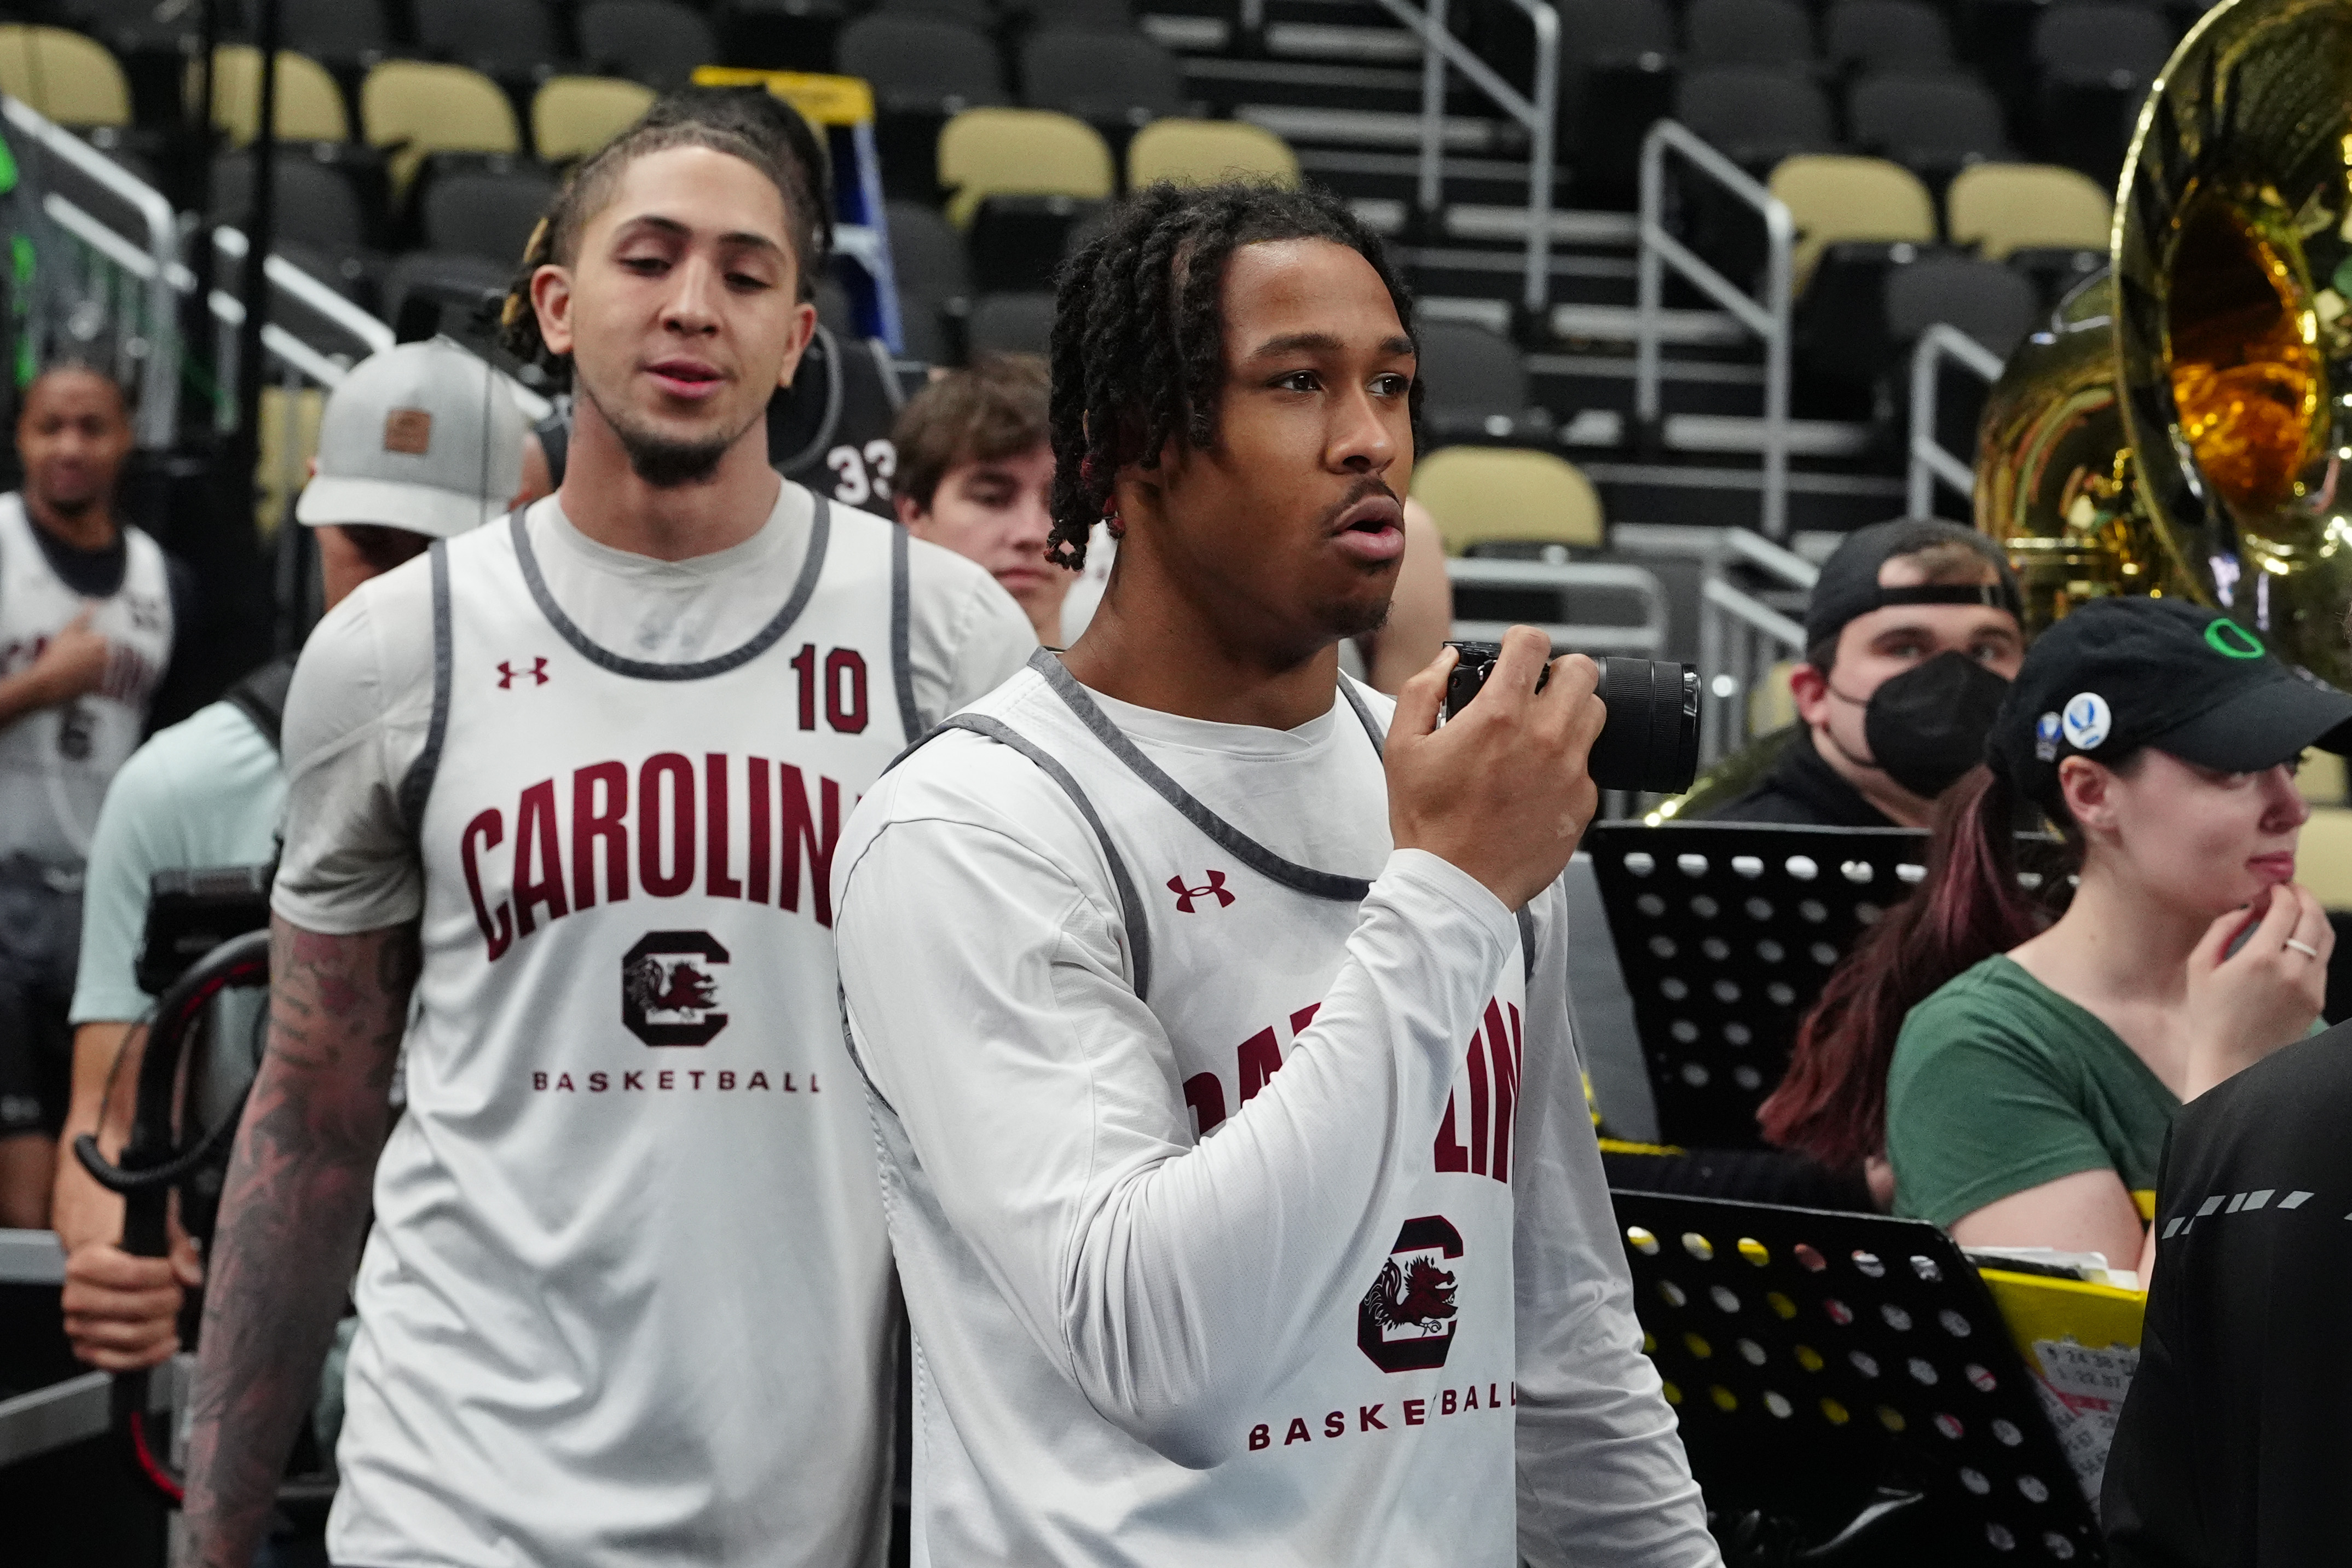 Meechie Johnson and guard Myles Stute (10) enter the court during the NCAA first round practice session at PPG Paints Arena